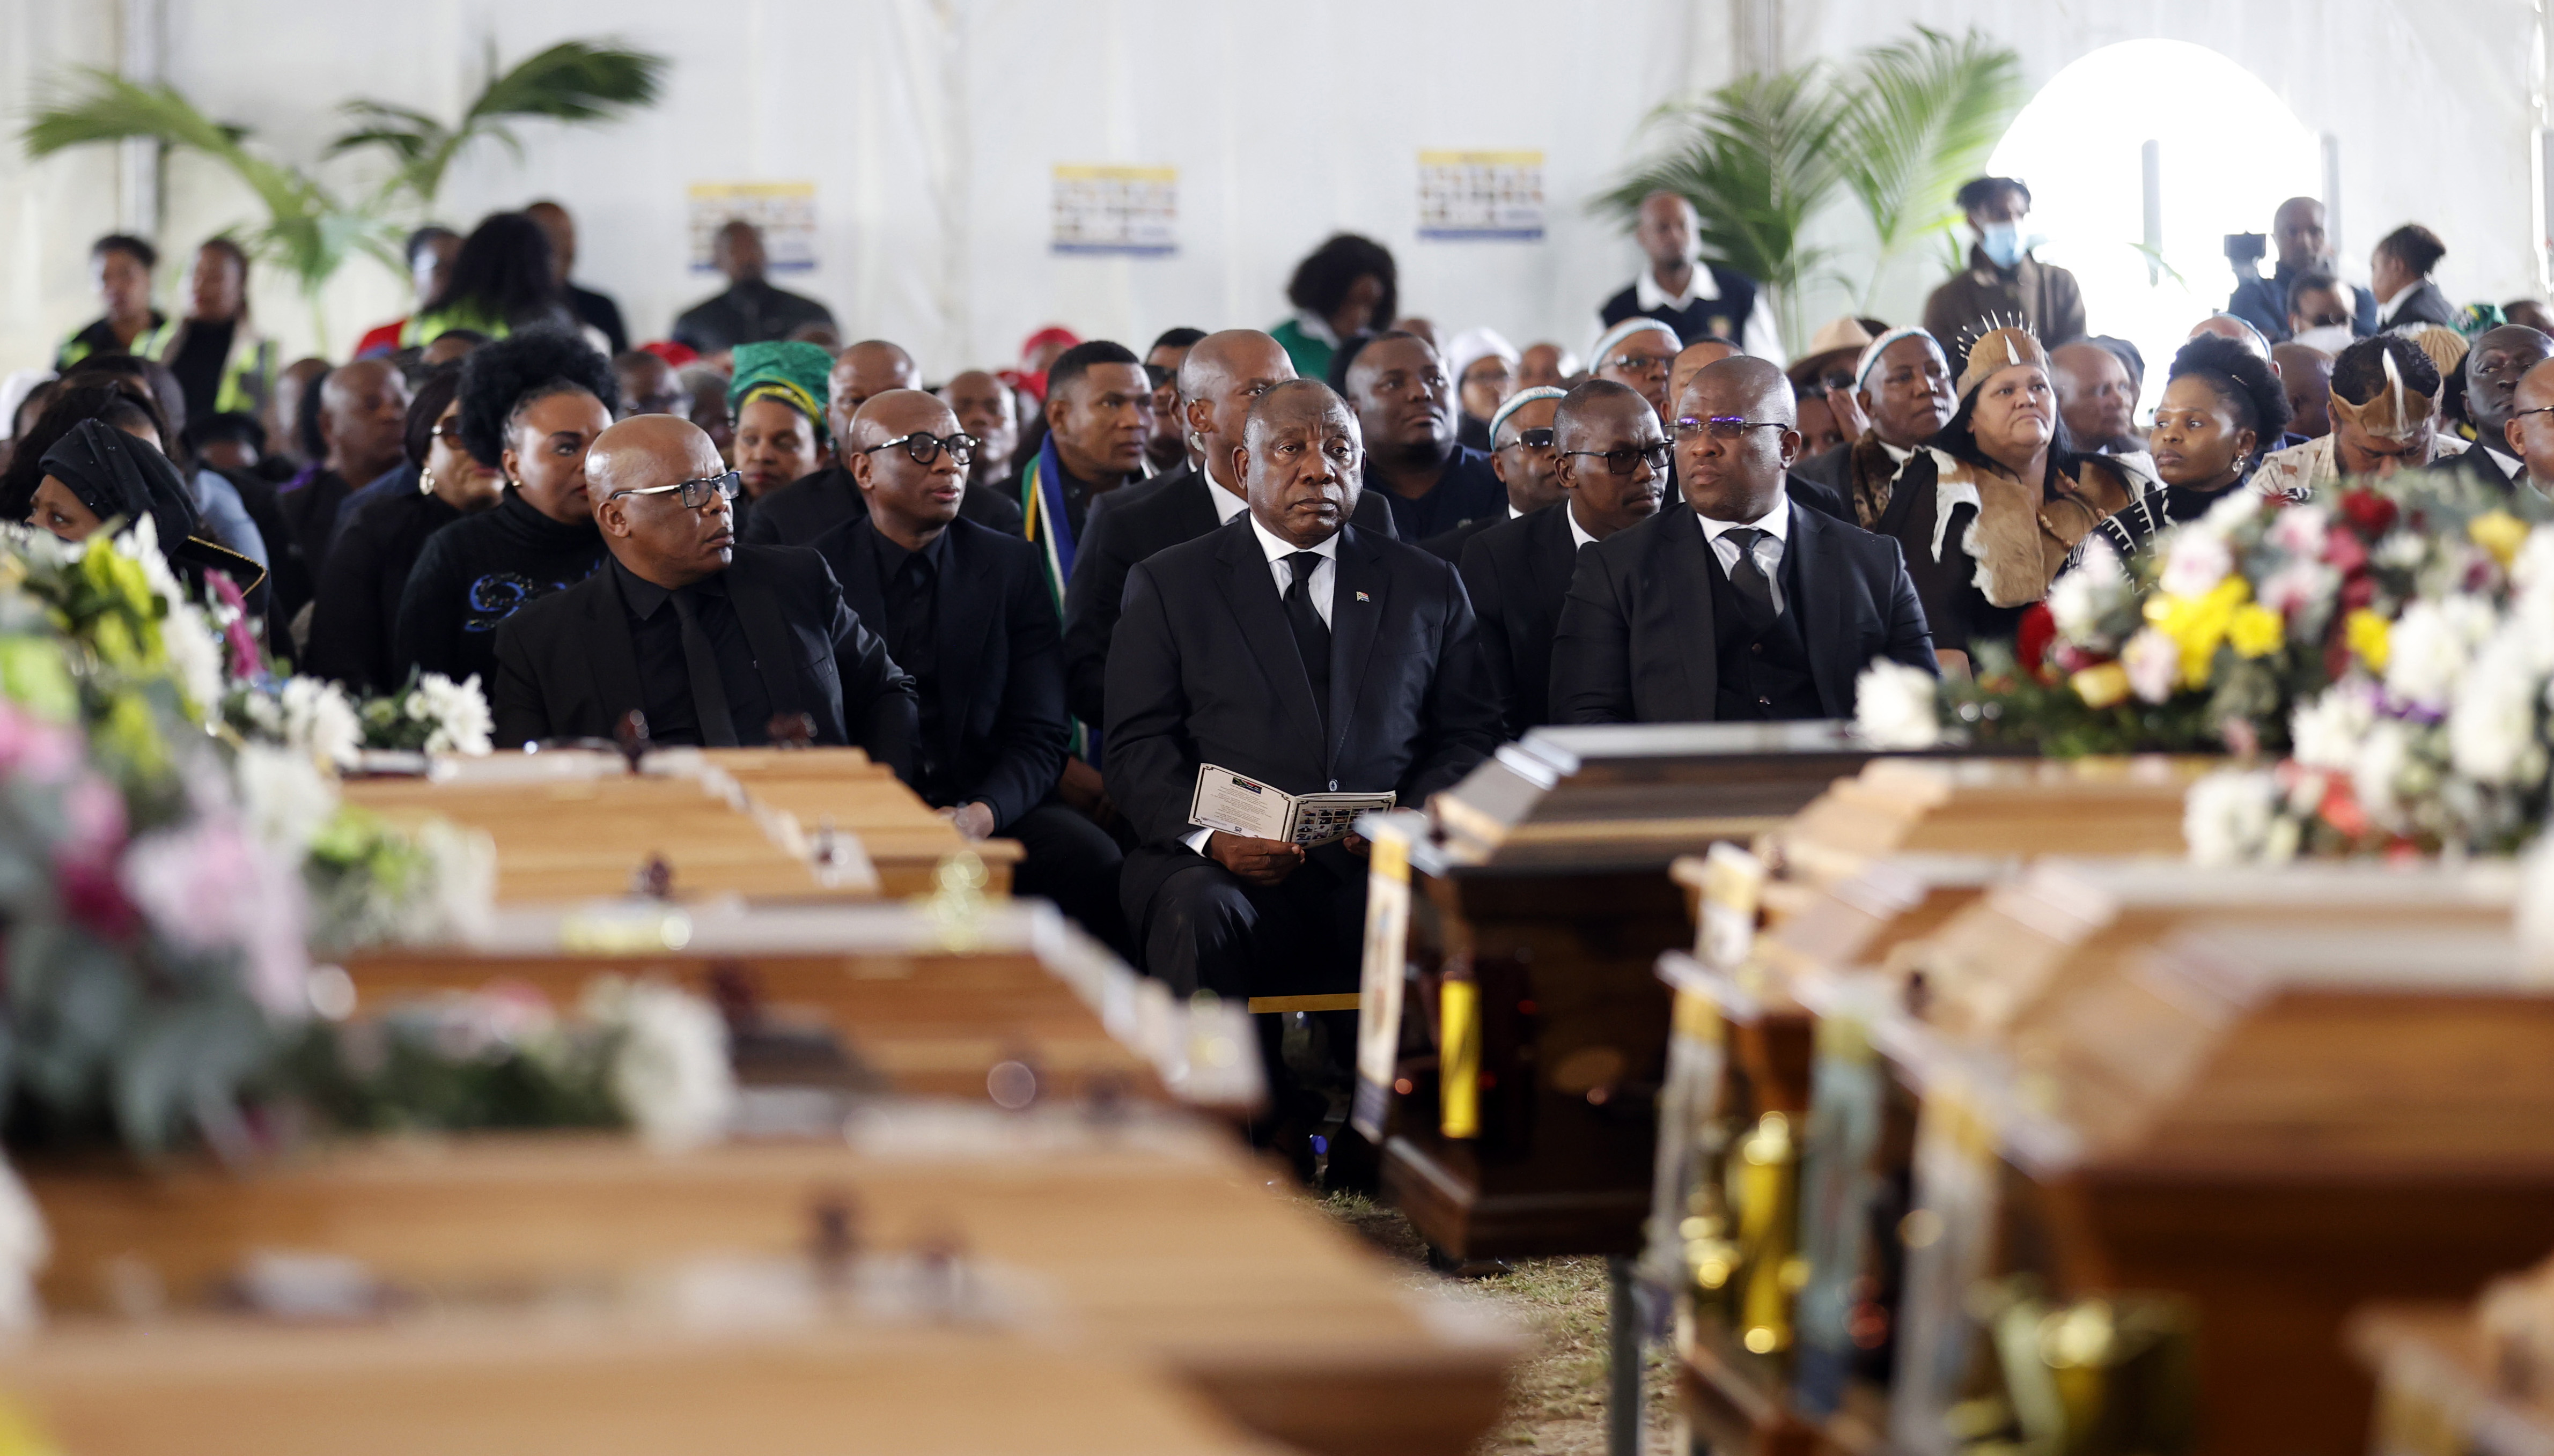 Mass shootings - a view of President Cyril Ramaphosa attending the mass funeral